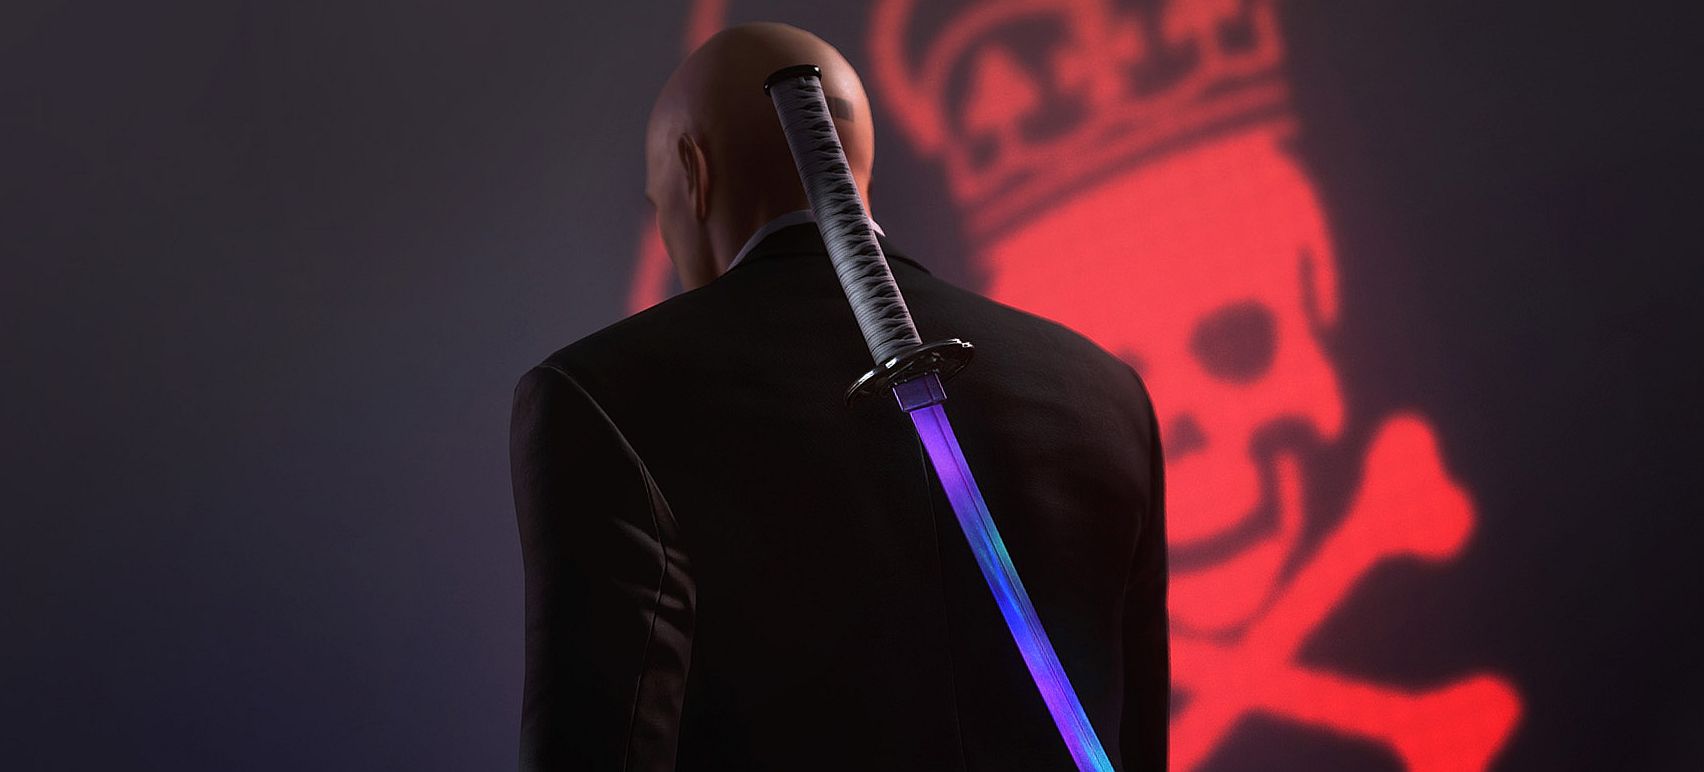 Image for Ambrose Island is a new location coming to Hitman 3 later this month